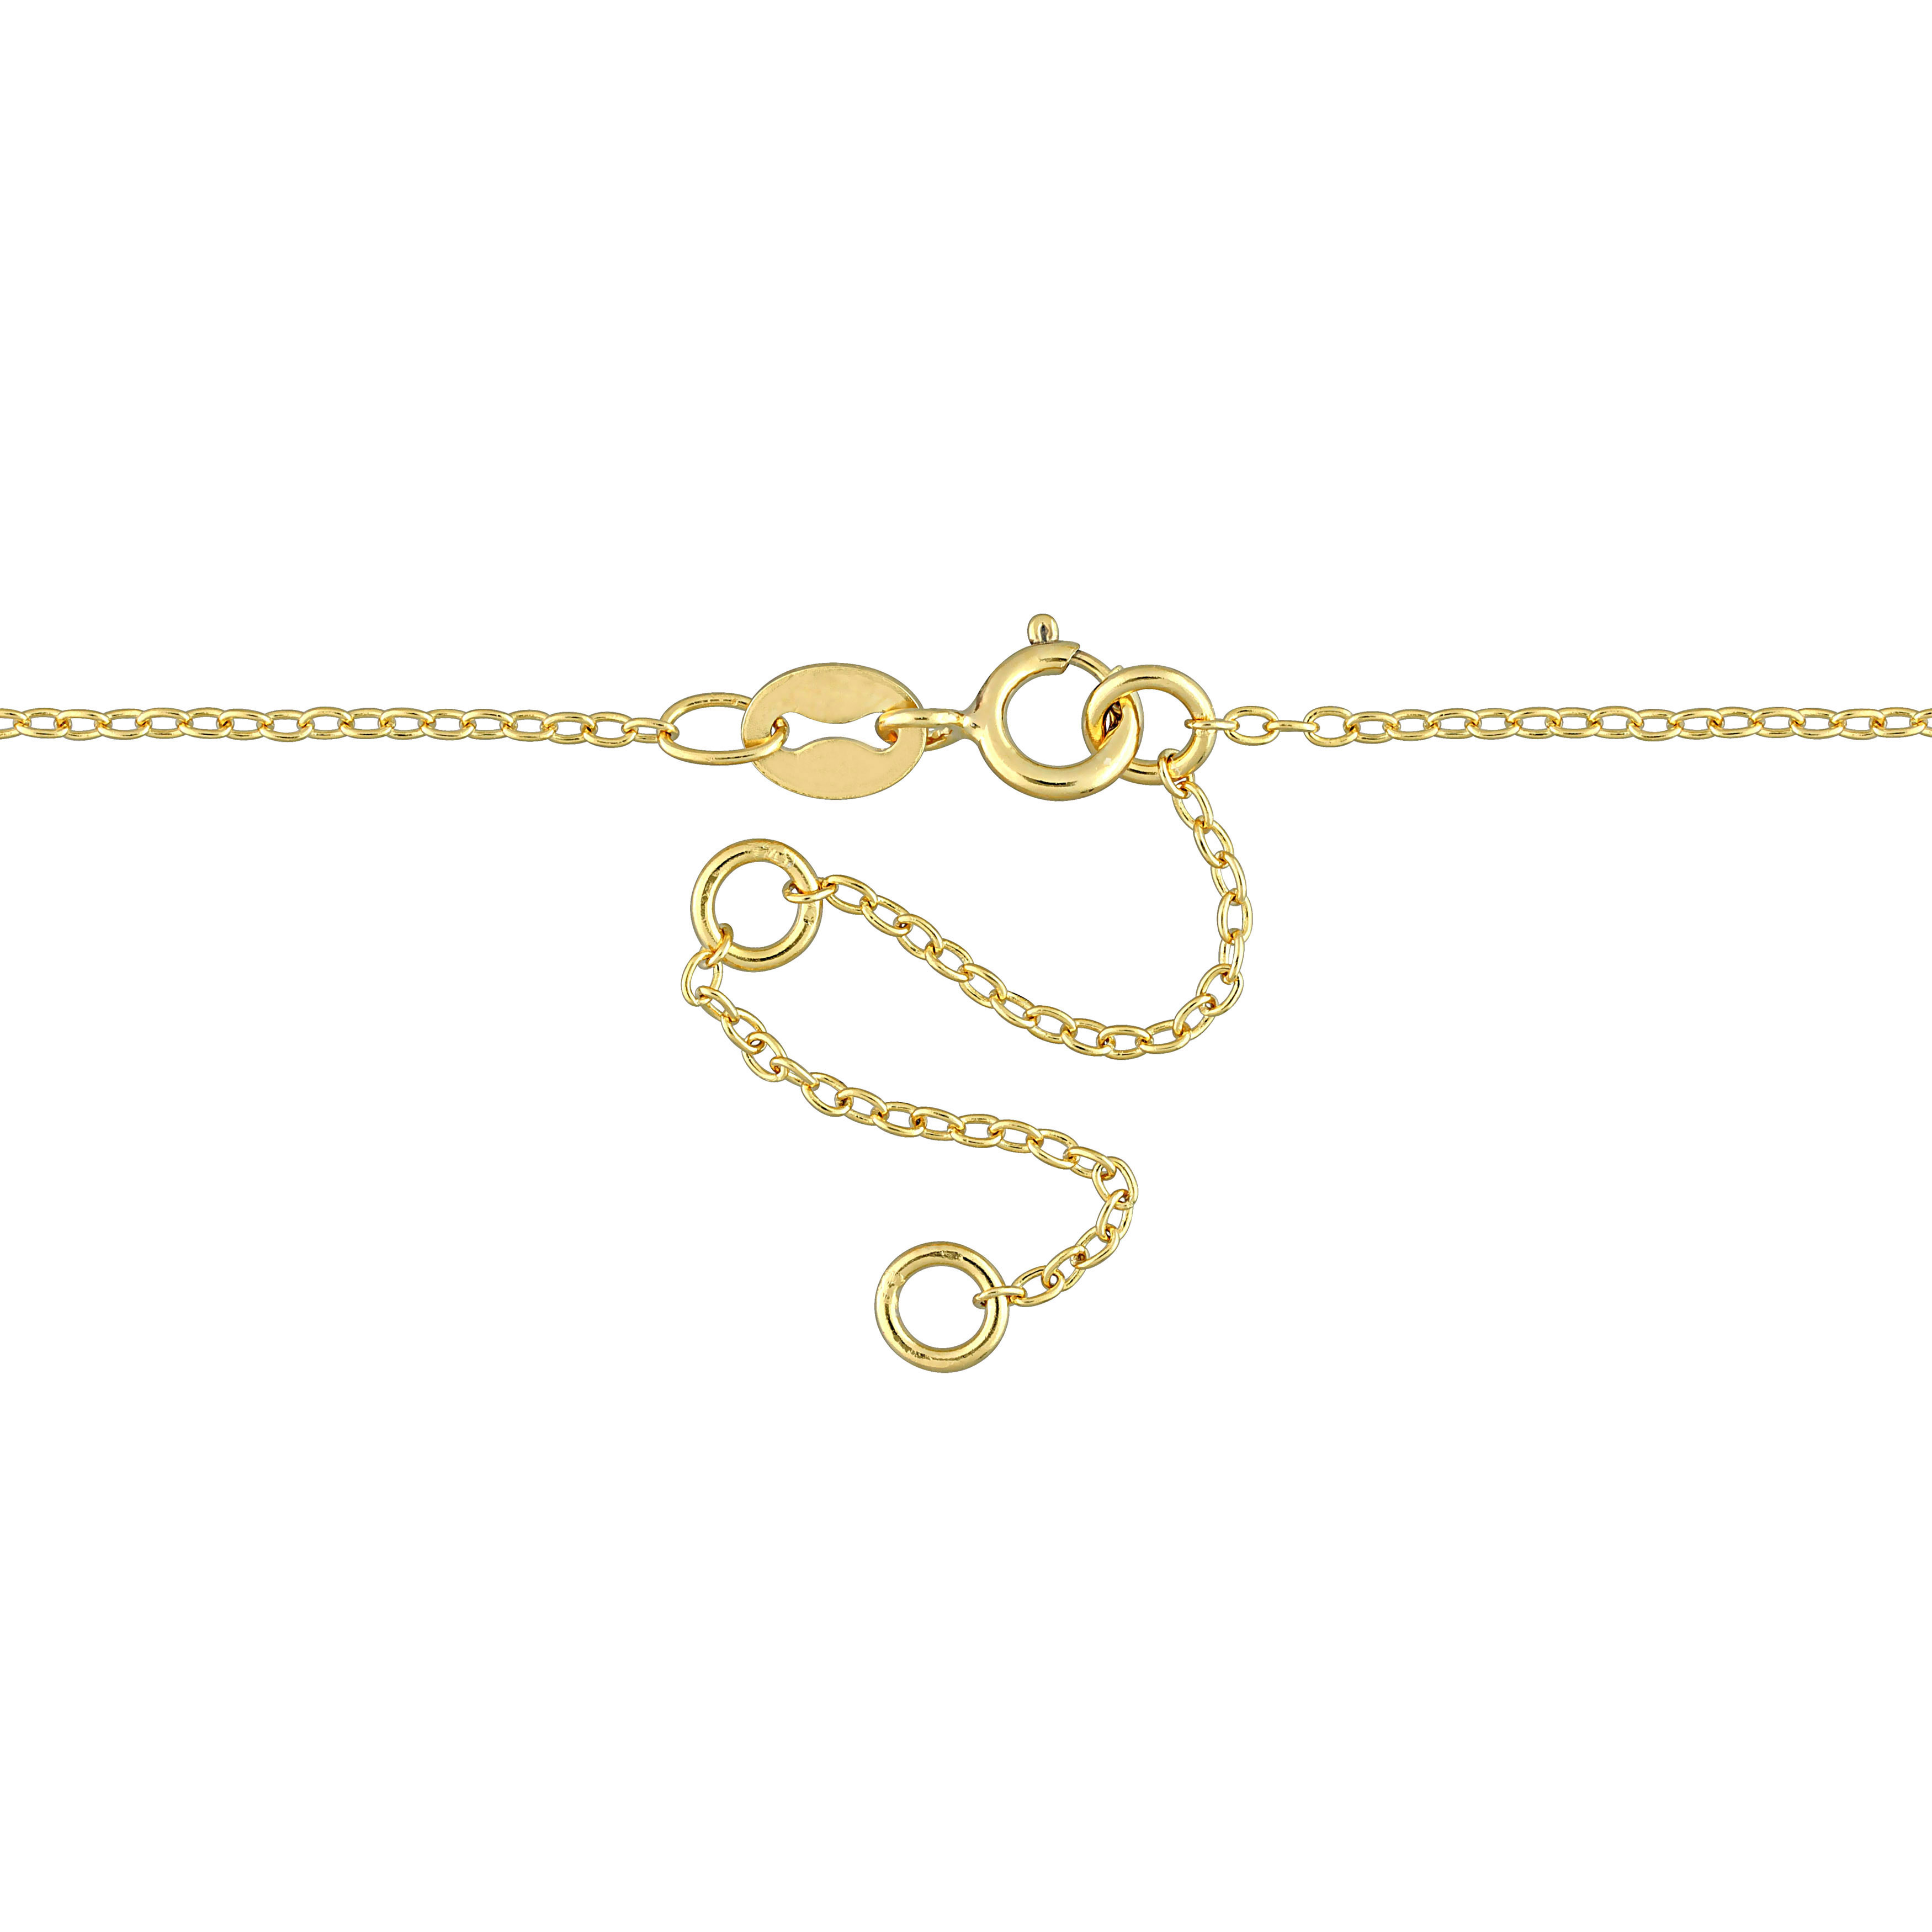 1/3 CT TGW Lab Created Diamond Lariat Earrings and Necklace 2-Piece Set in 18k Yellow Gold Plated Sterling Silver